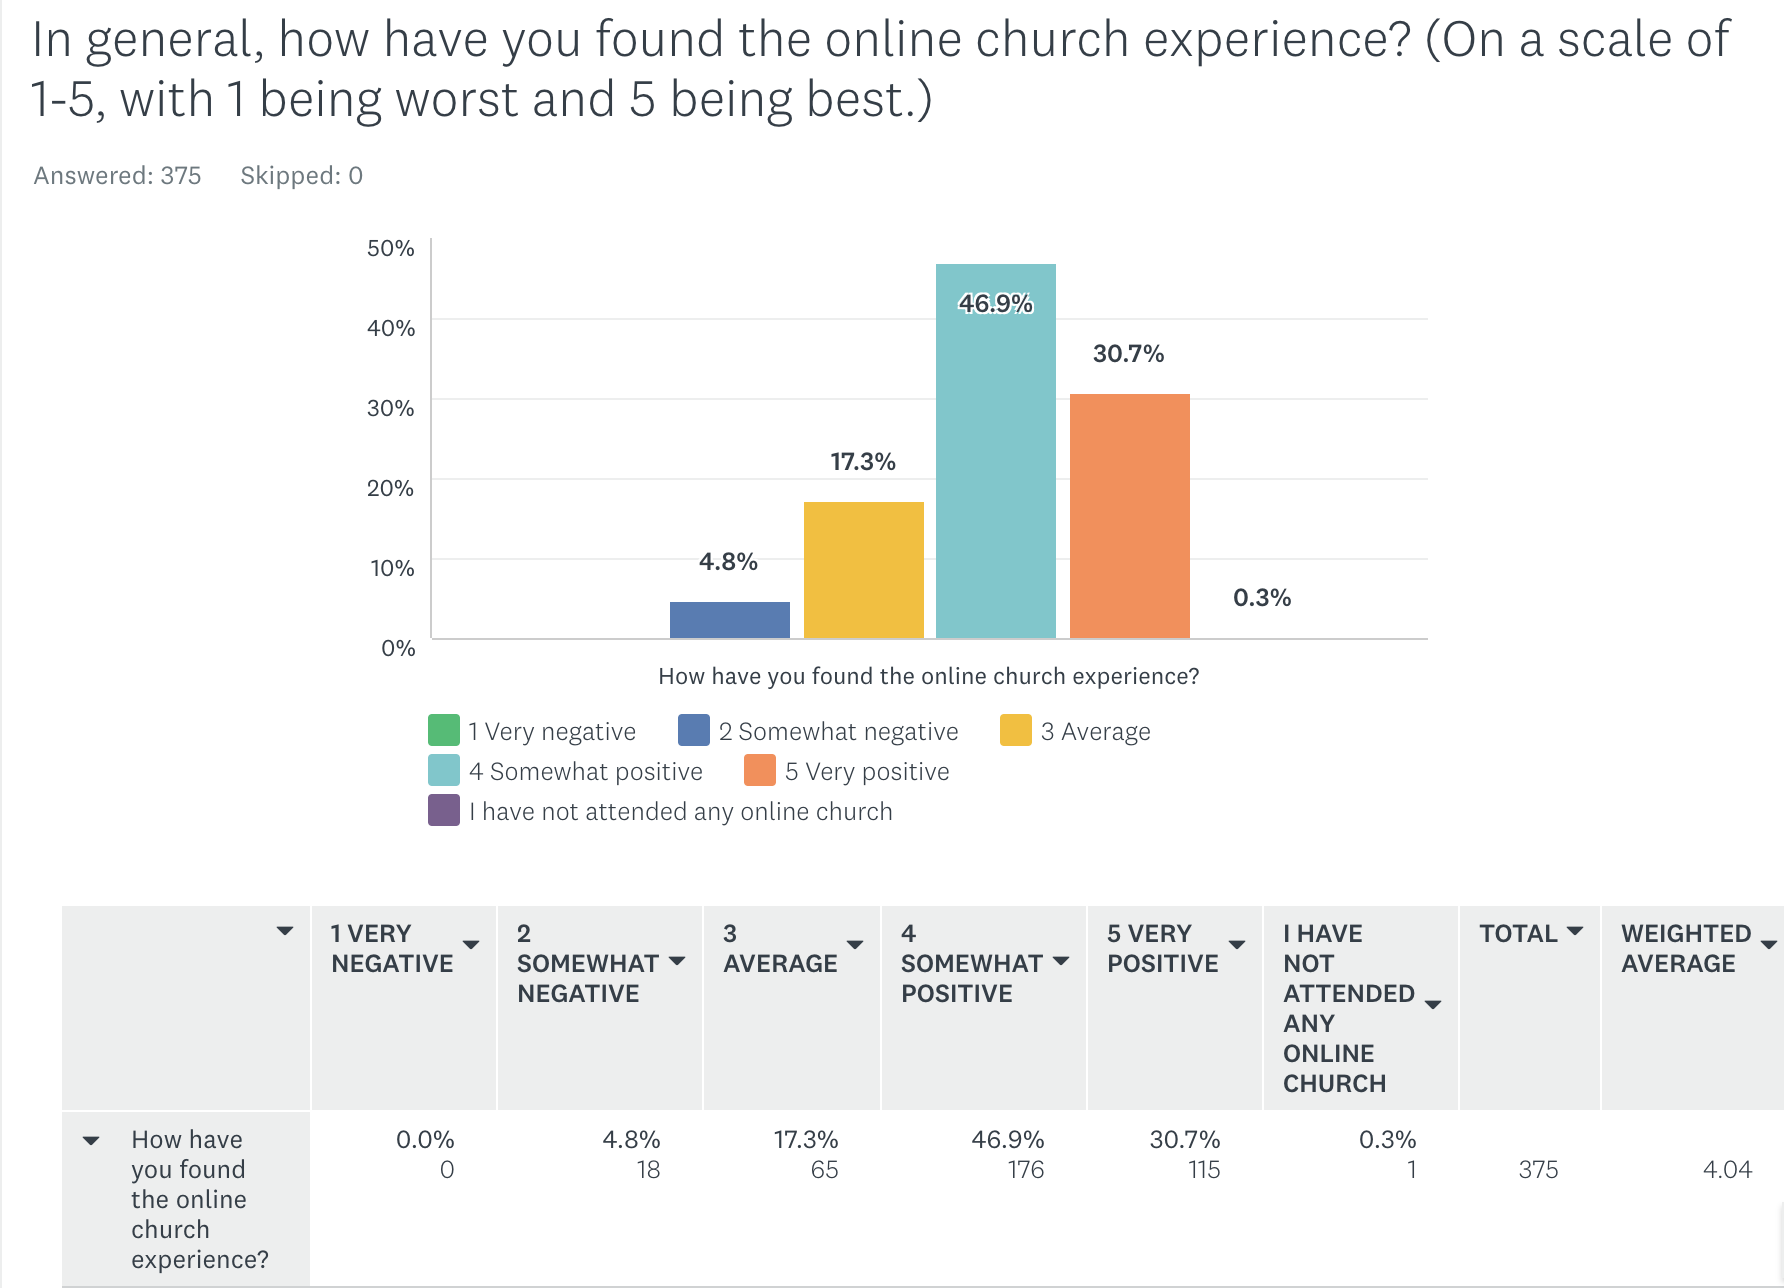 How have you found the online church experience?